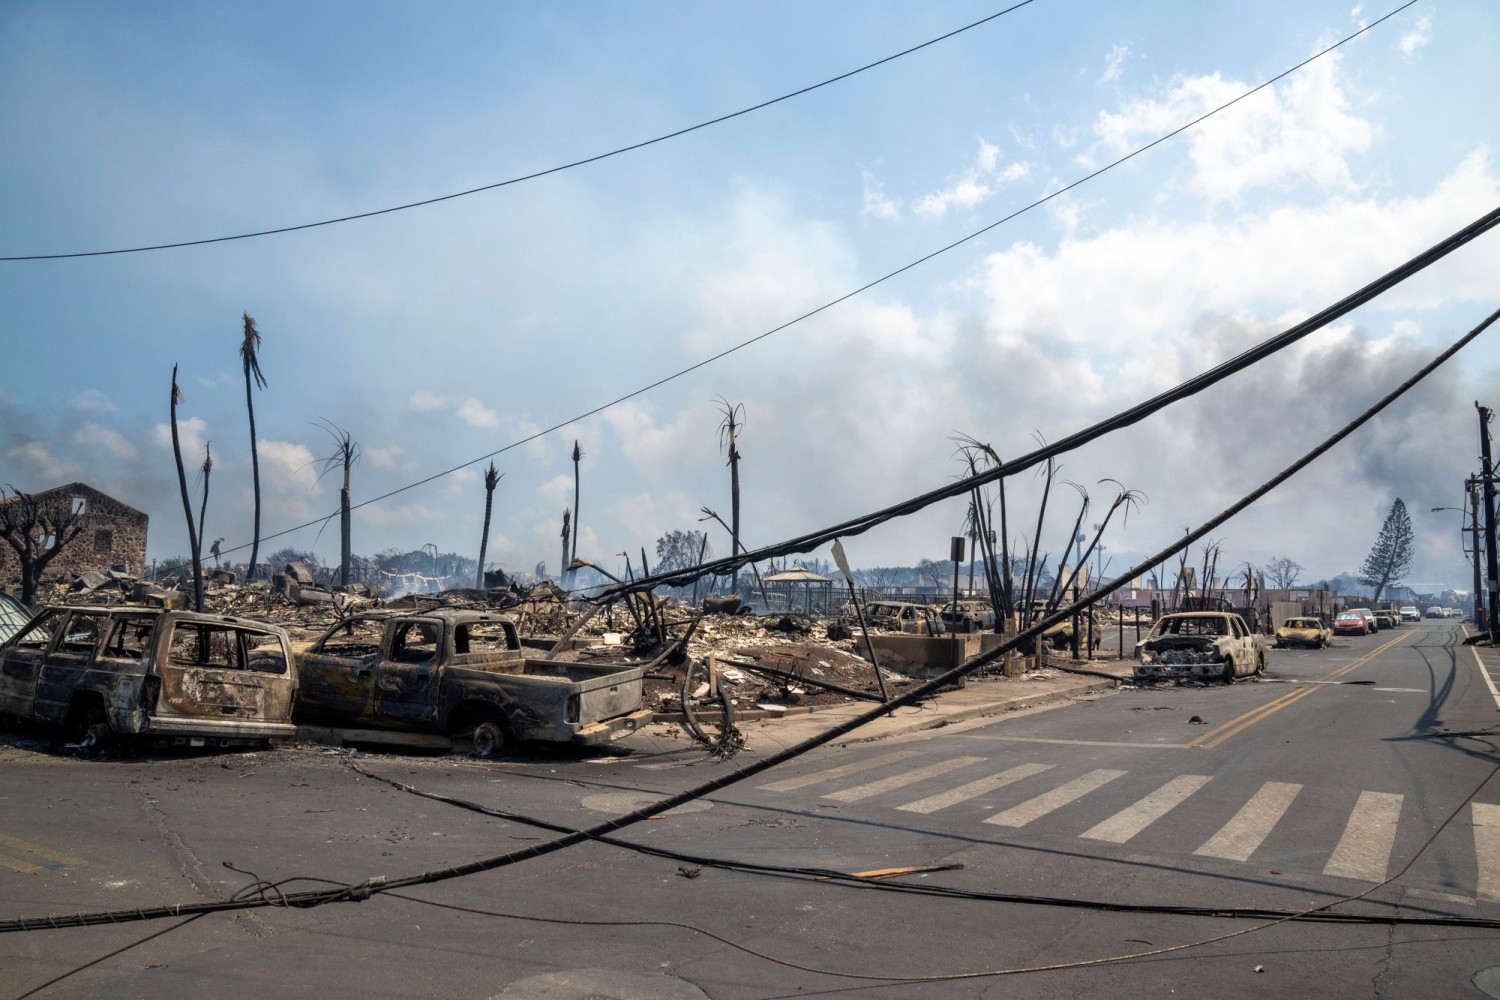 Wildfire wreckage in the Maui town of Lahaina. The fire’s cause hasn’t been determined, but evidence suggests the utility’s equipment was involved. TIFFANY KIDDER WINN/ASSOCIATED PRESS